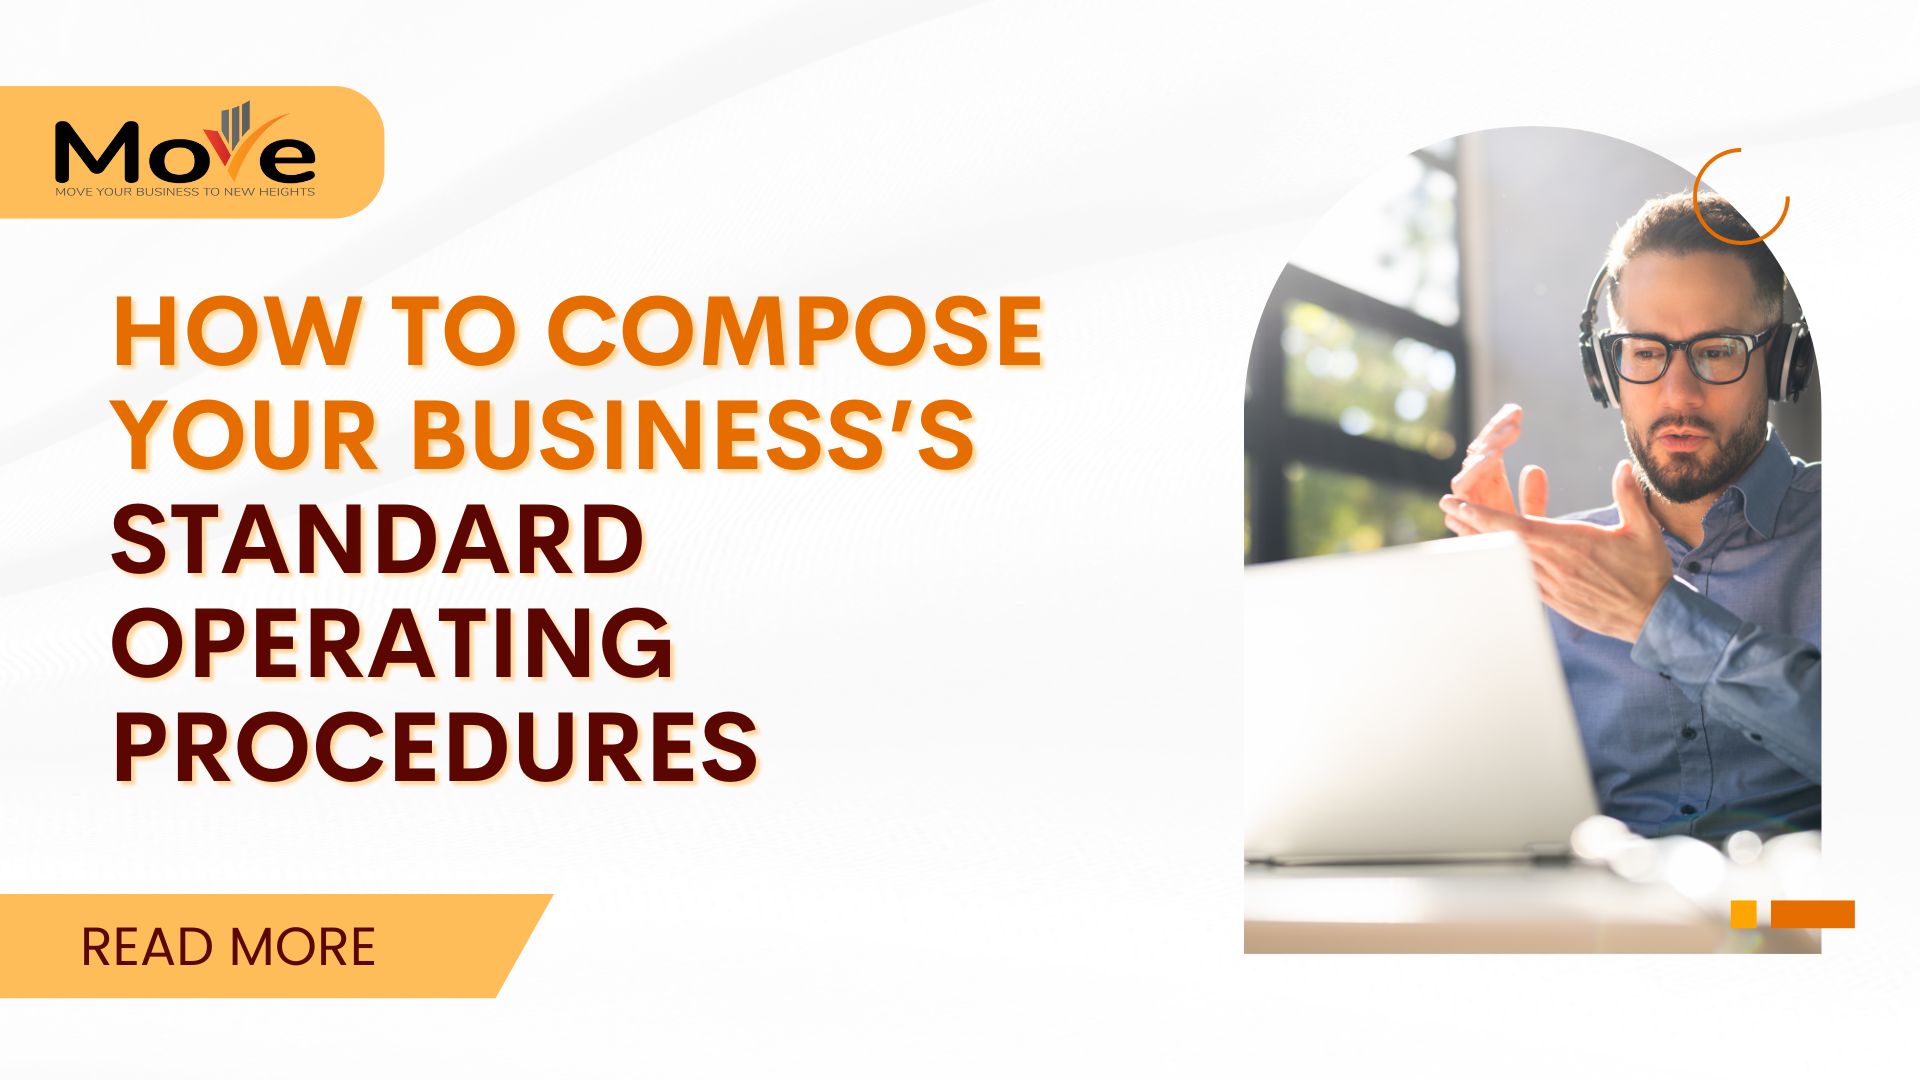 How to Compose Your Business’s Standard Operating Procedures